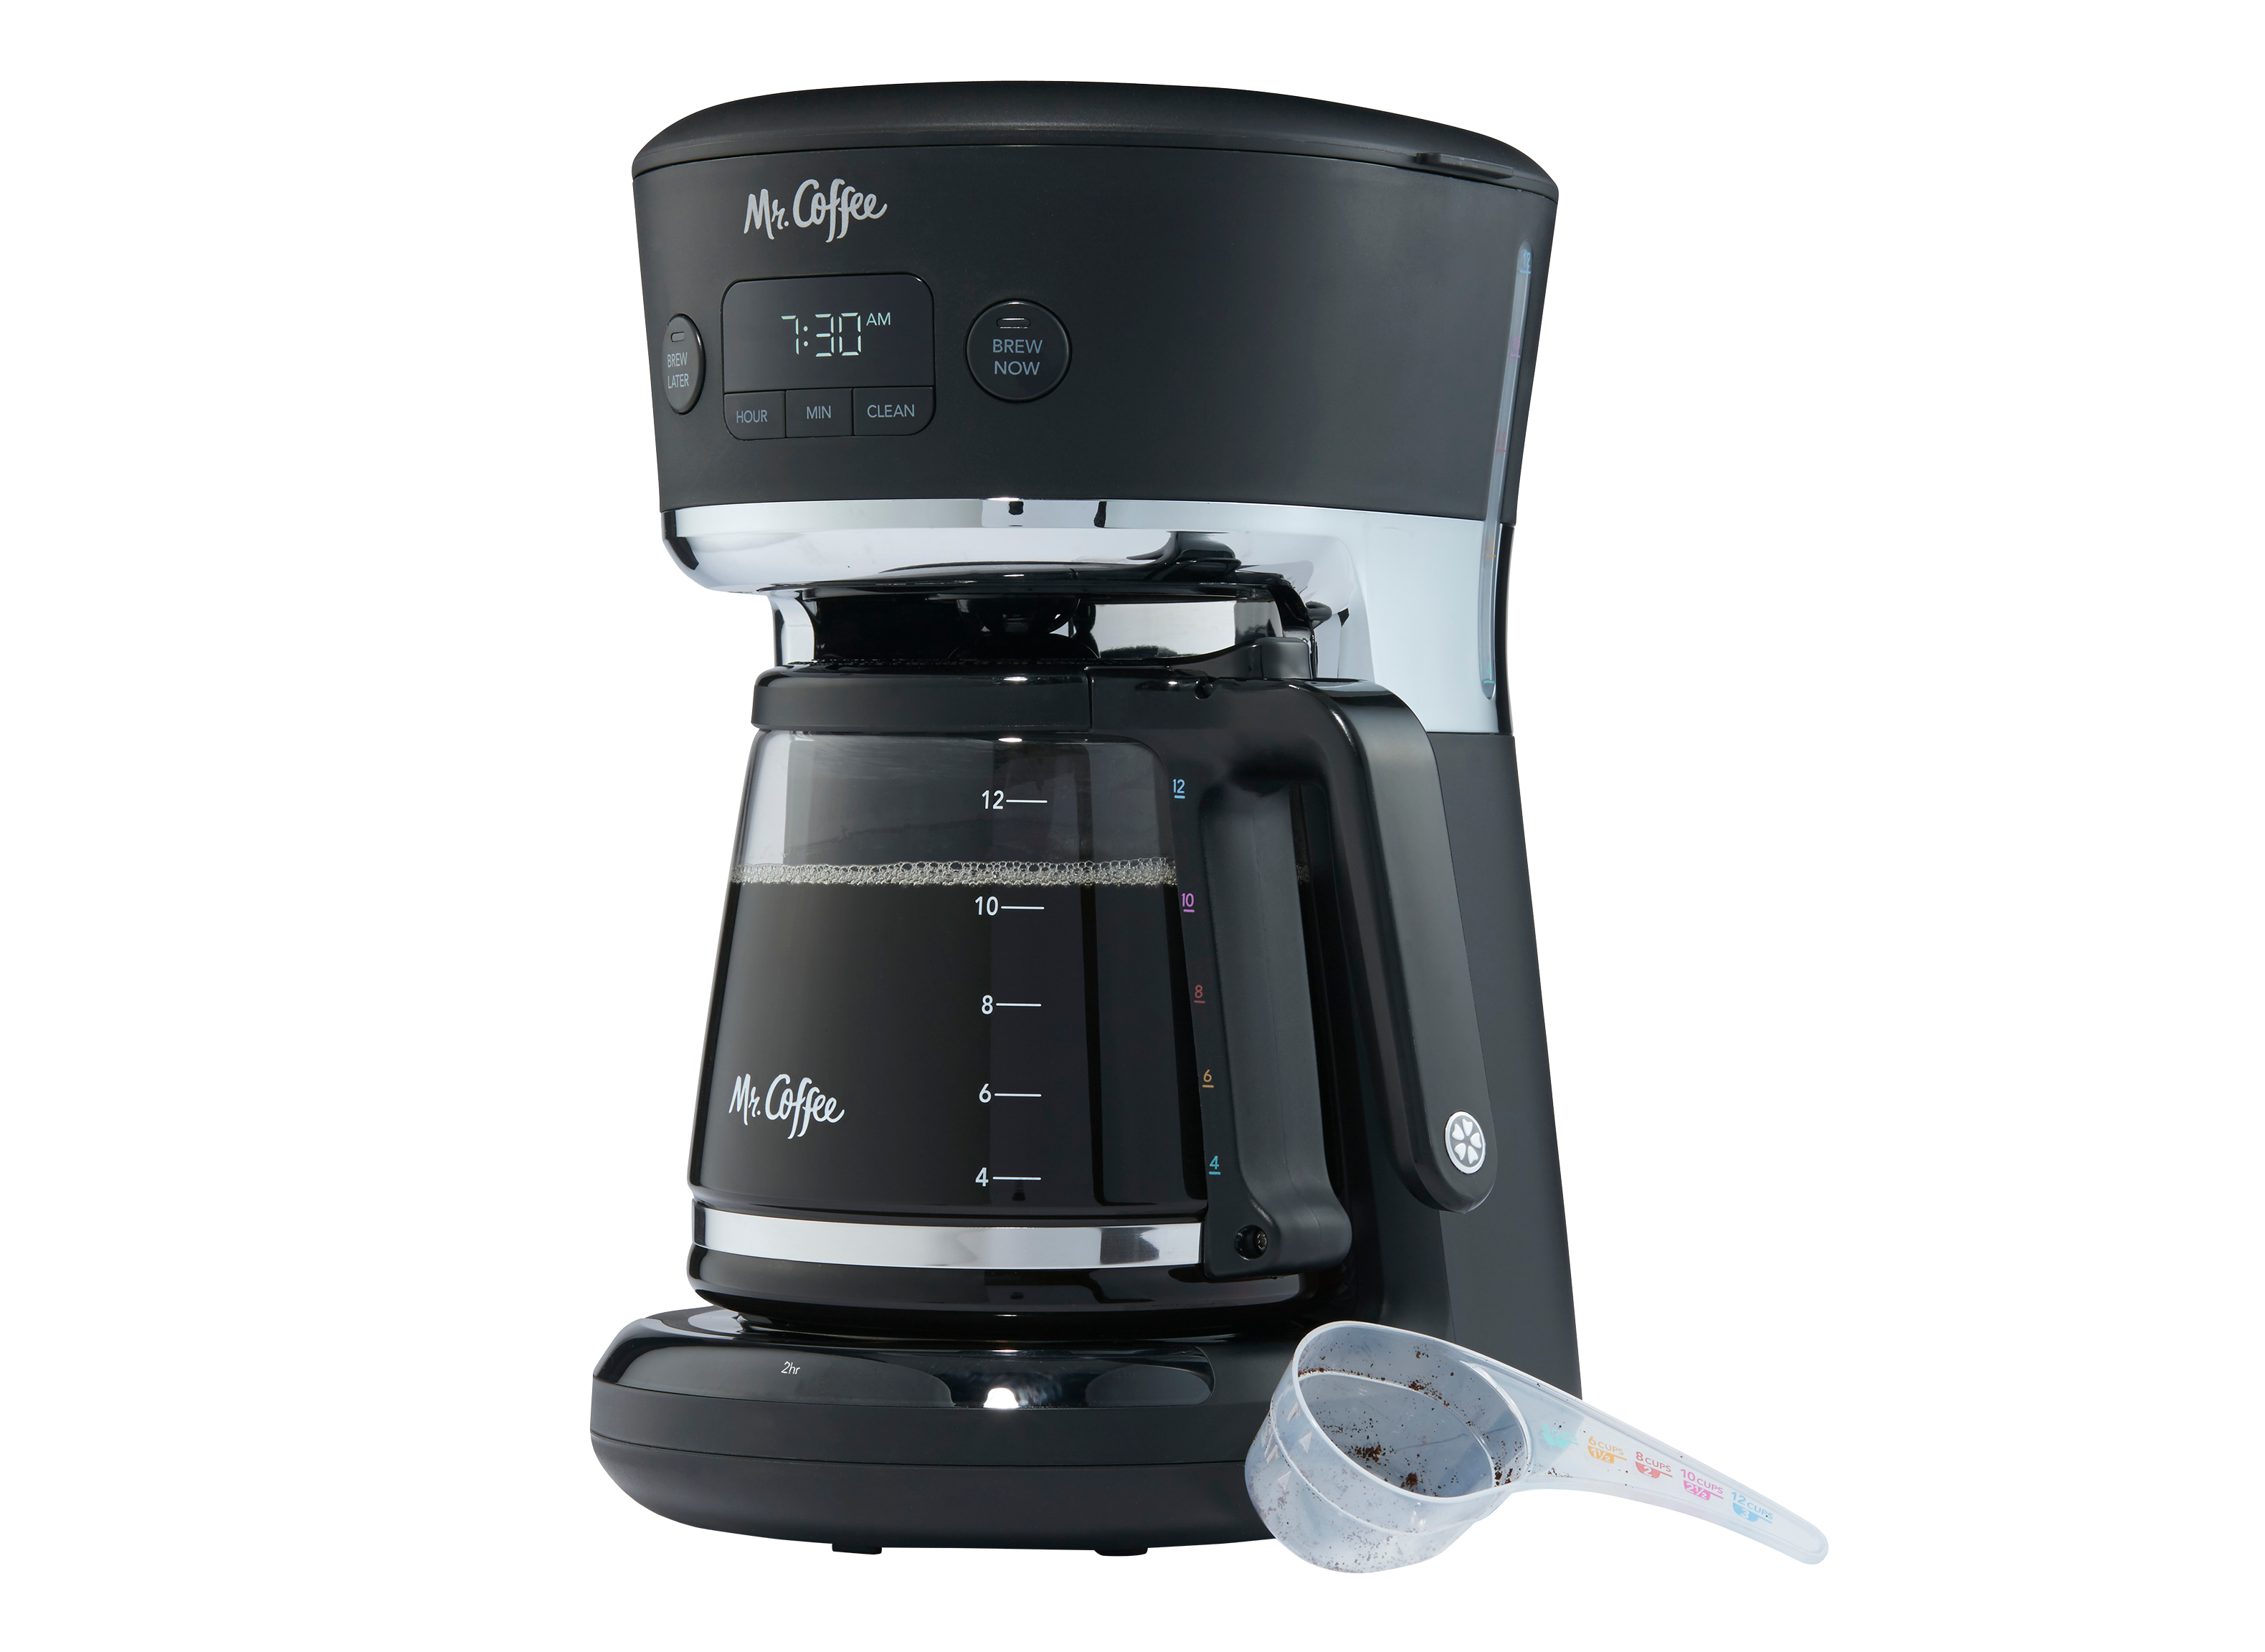 https://crdms.images.consumerreports.org/prod/products/cr/models/401354-drip-coffee-makers-with-carafe-mr-coffee-easy-measure-12-cup-2086696-10013107.png